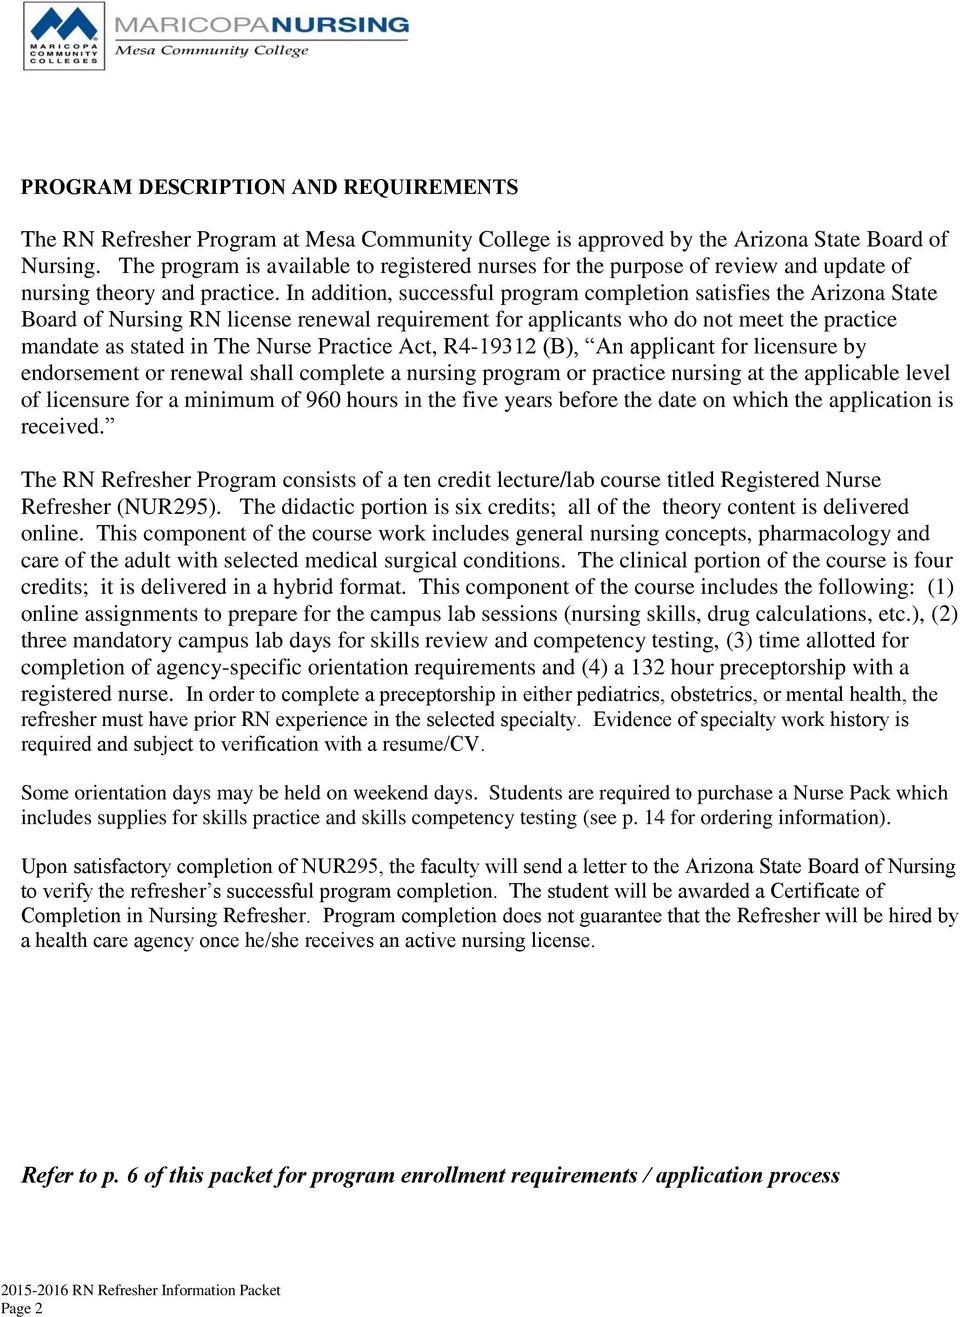 In addition, successful program completion satisfies the Arizona State Board of Nursing RN license renewal requirement for applicants who do not meet the practice mandate as stated in The Nurse